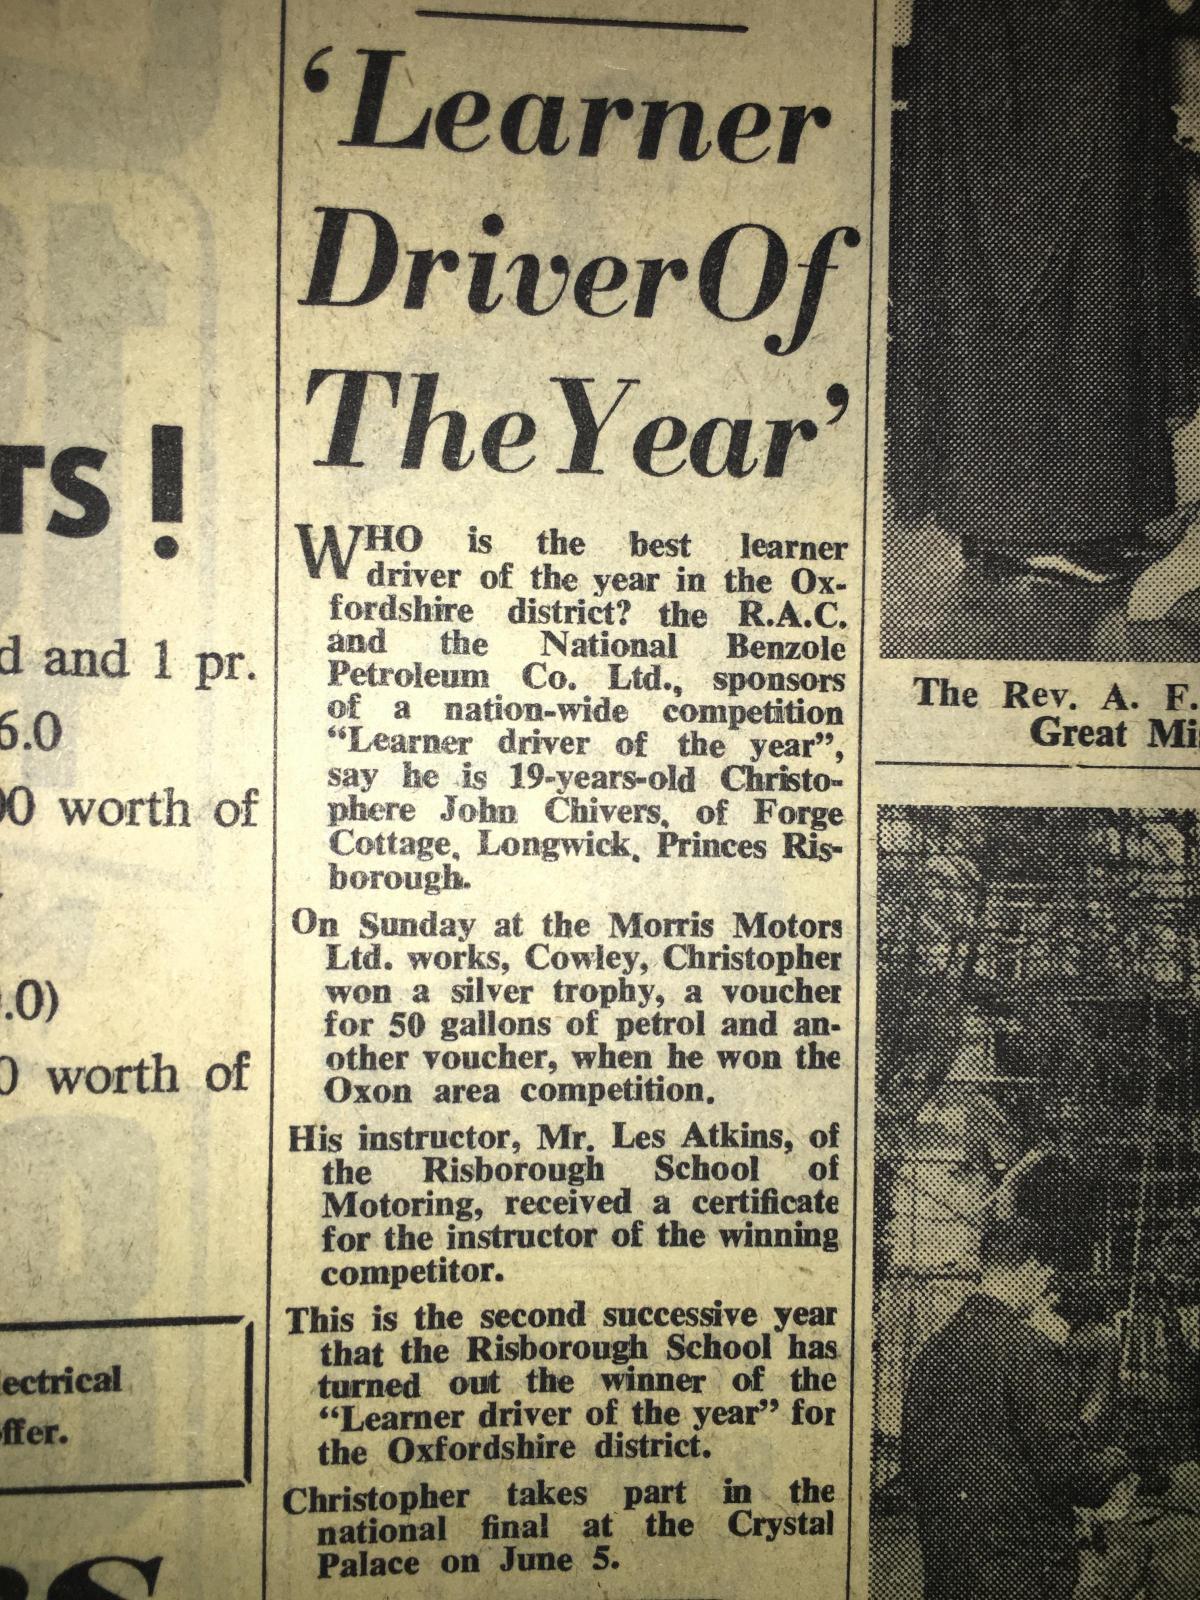 Who was the learner driver of 1966?